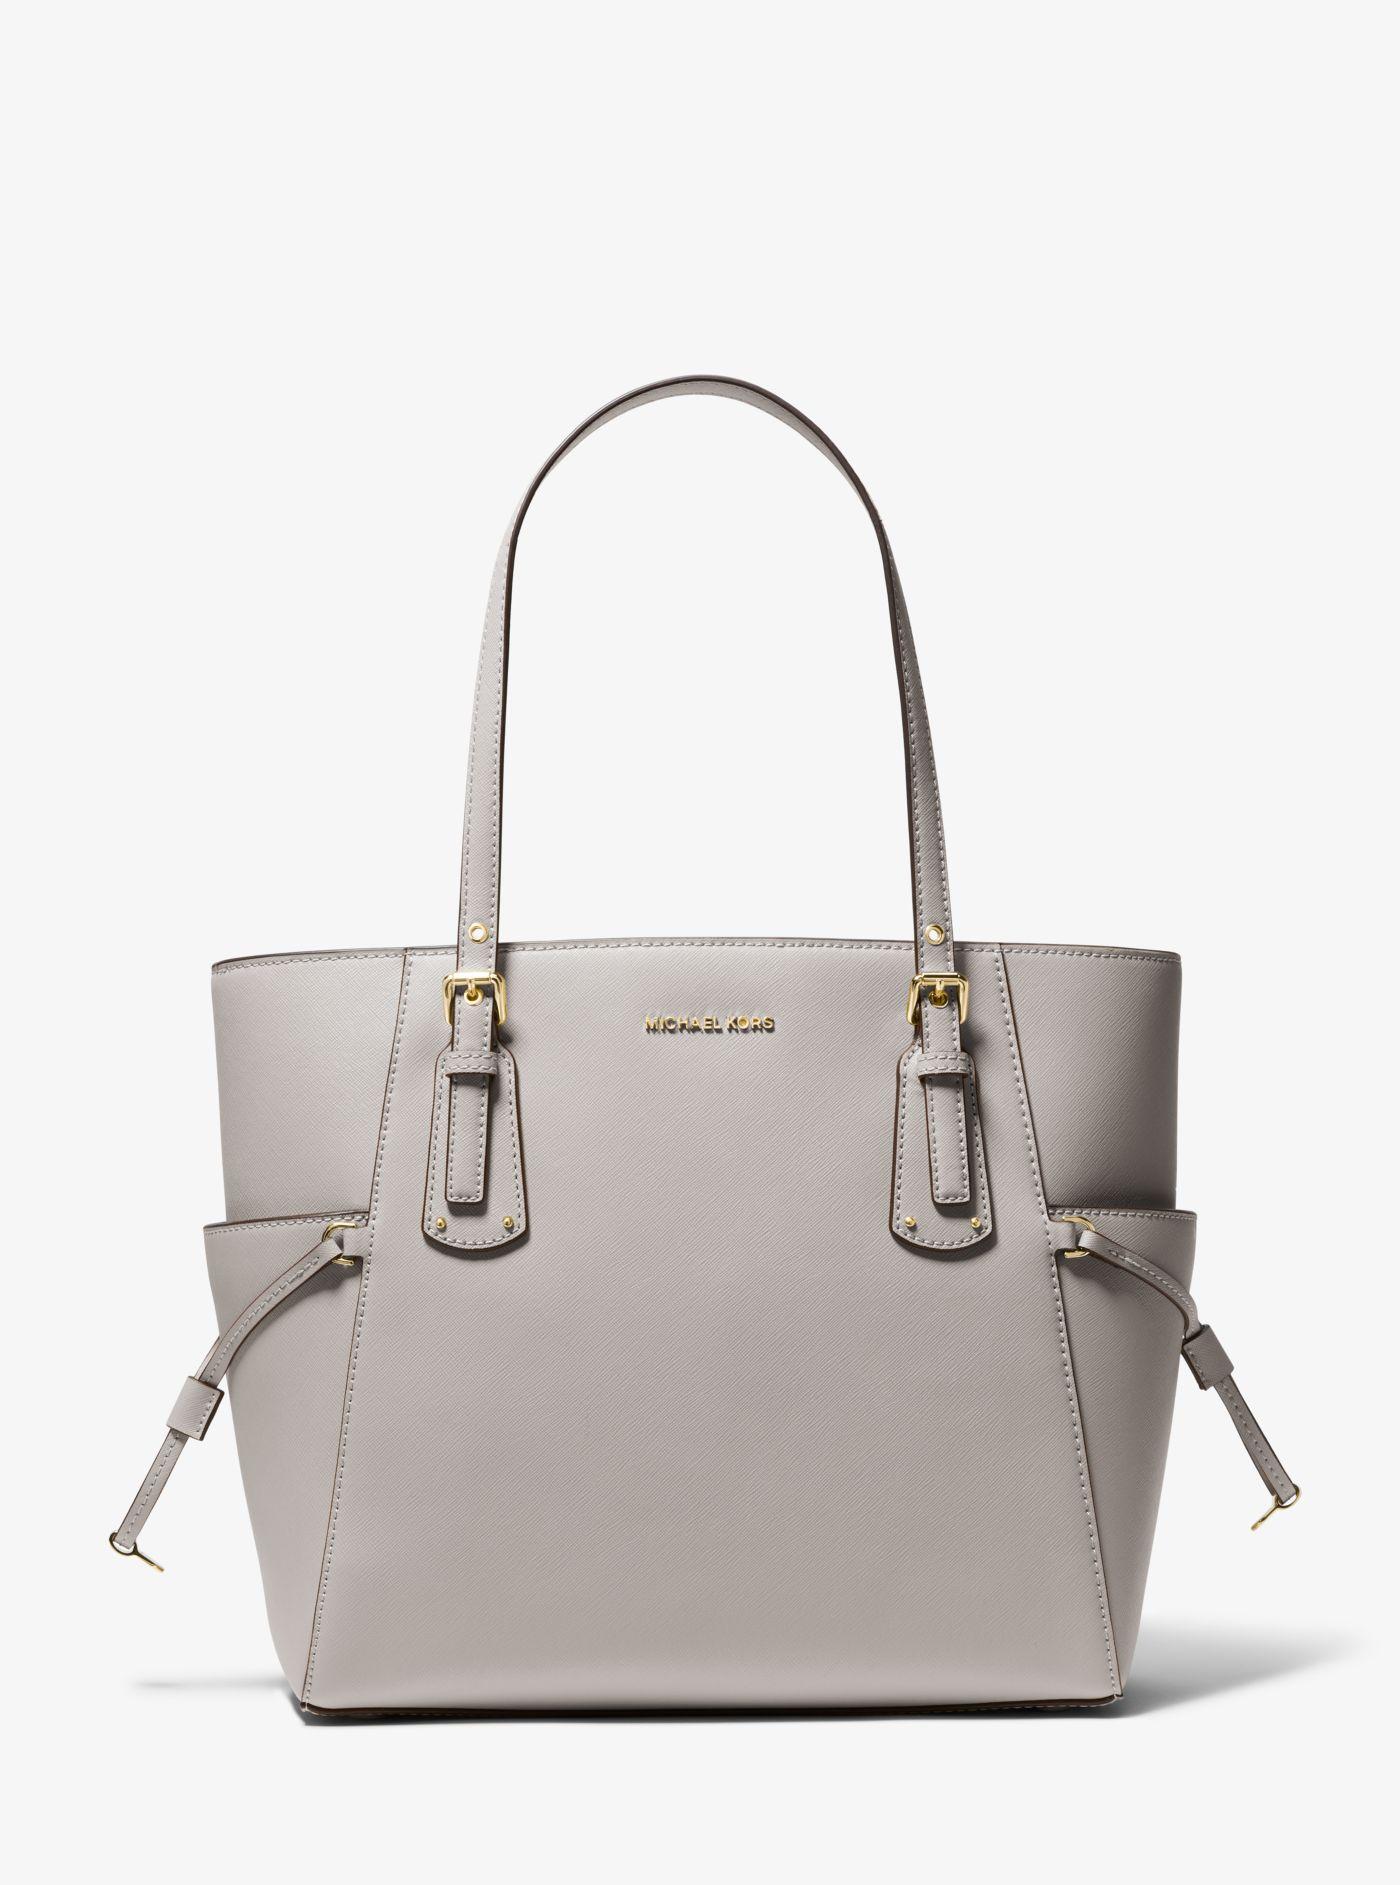 Michael Kors Voyager Small Saffiano Leather Tote Bag in White | Lyst